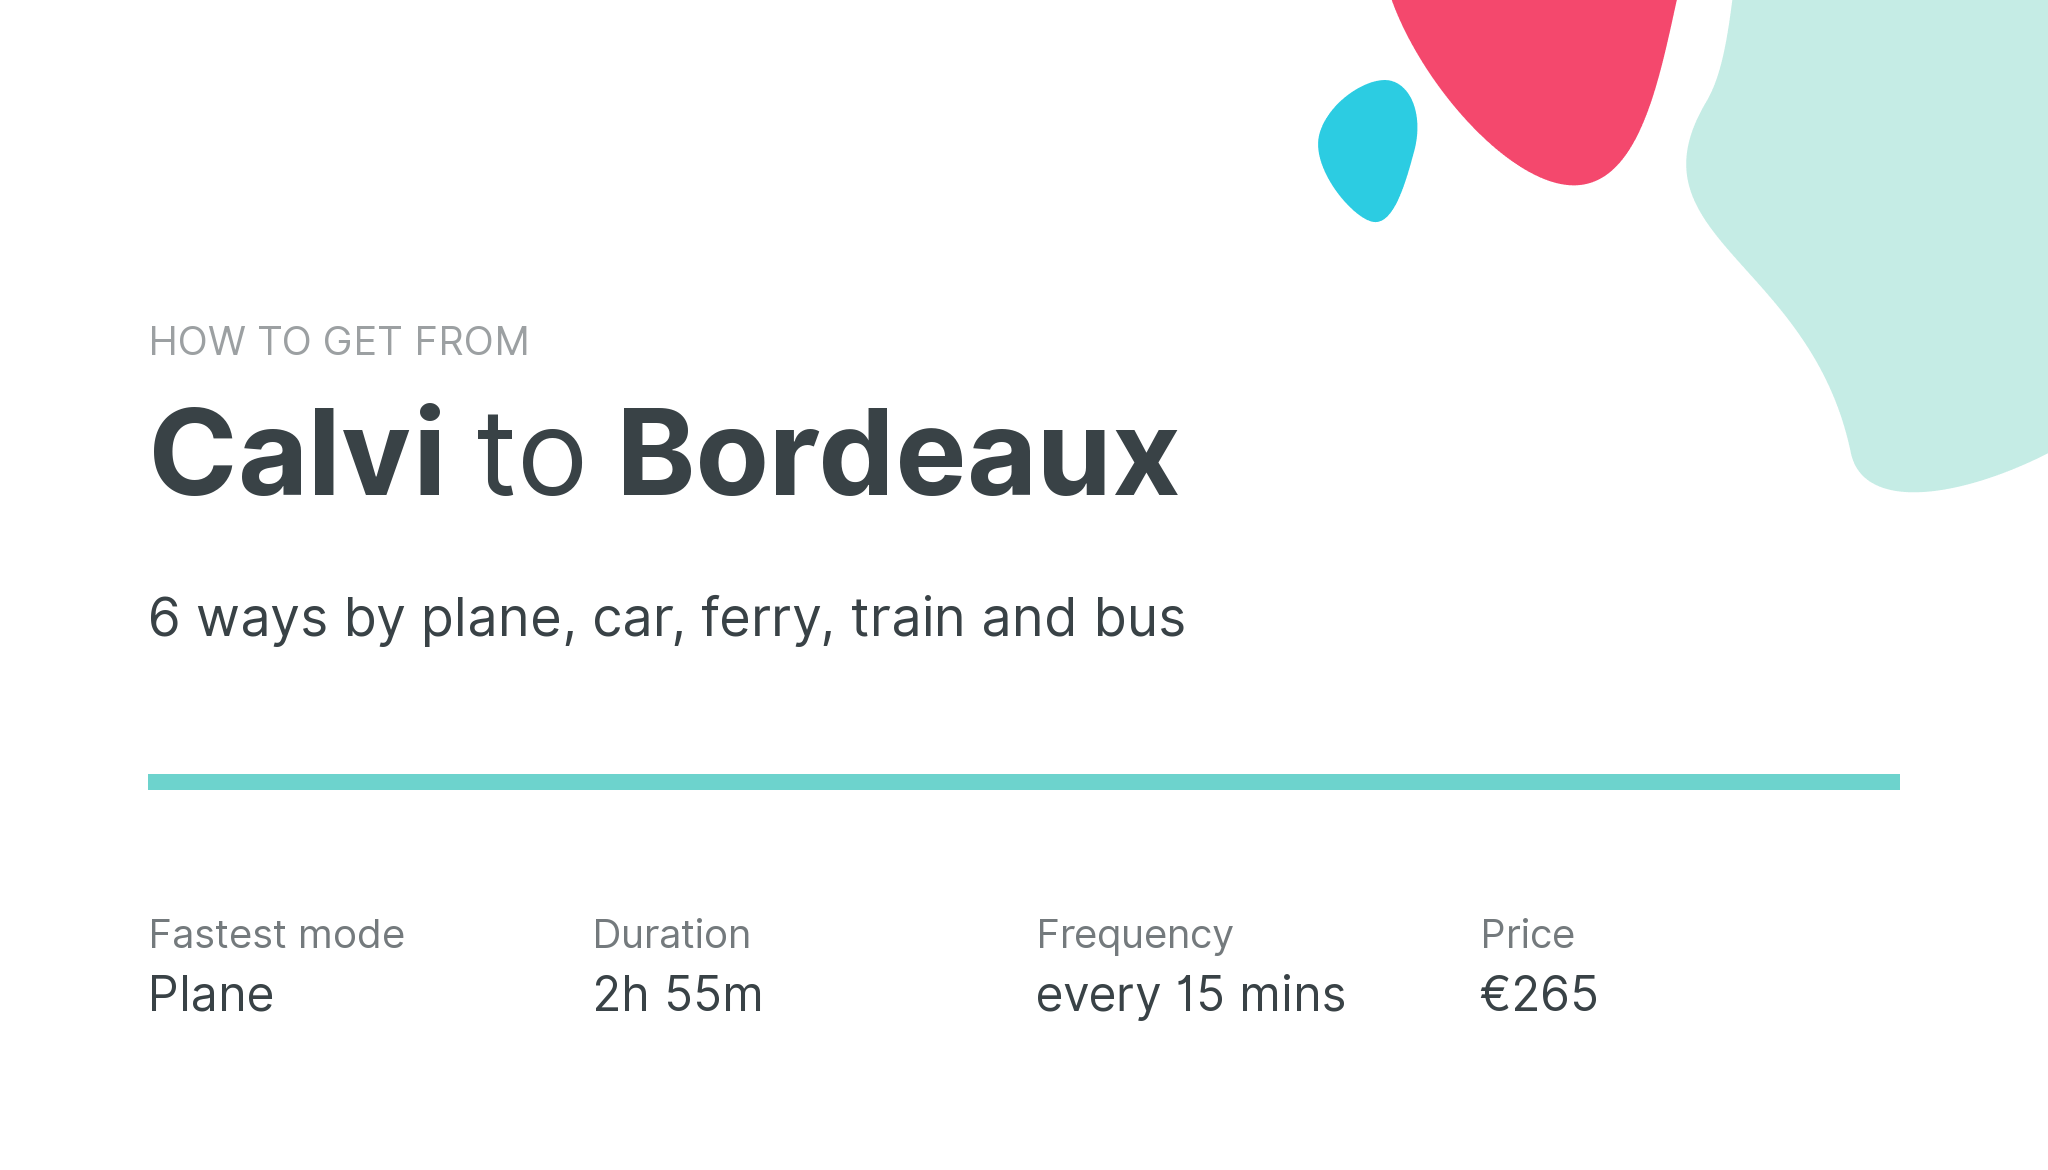 How do I get from Calvi to Bordeaux